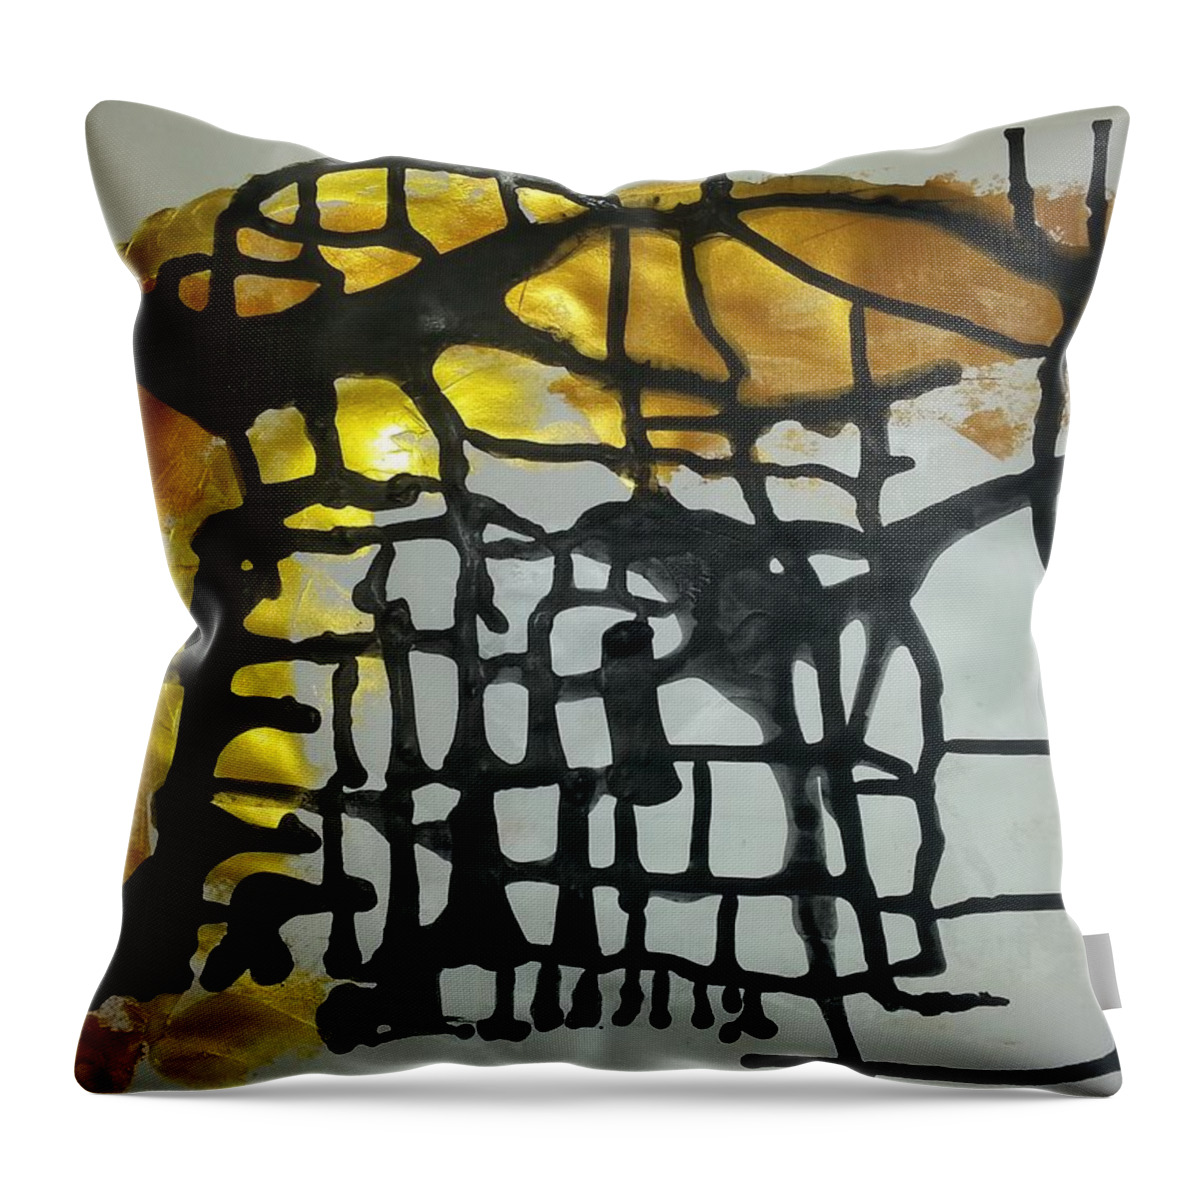  Throw Pillow featuring the painting Caos 32 by Giuseppe Monti